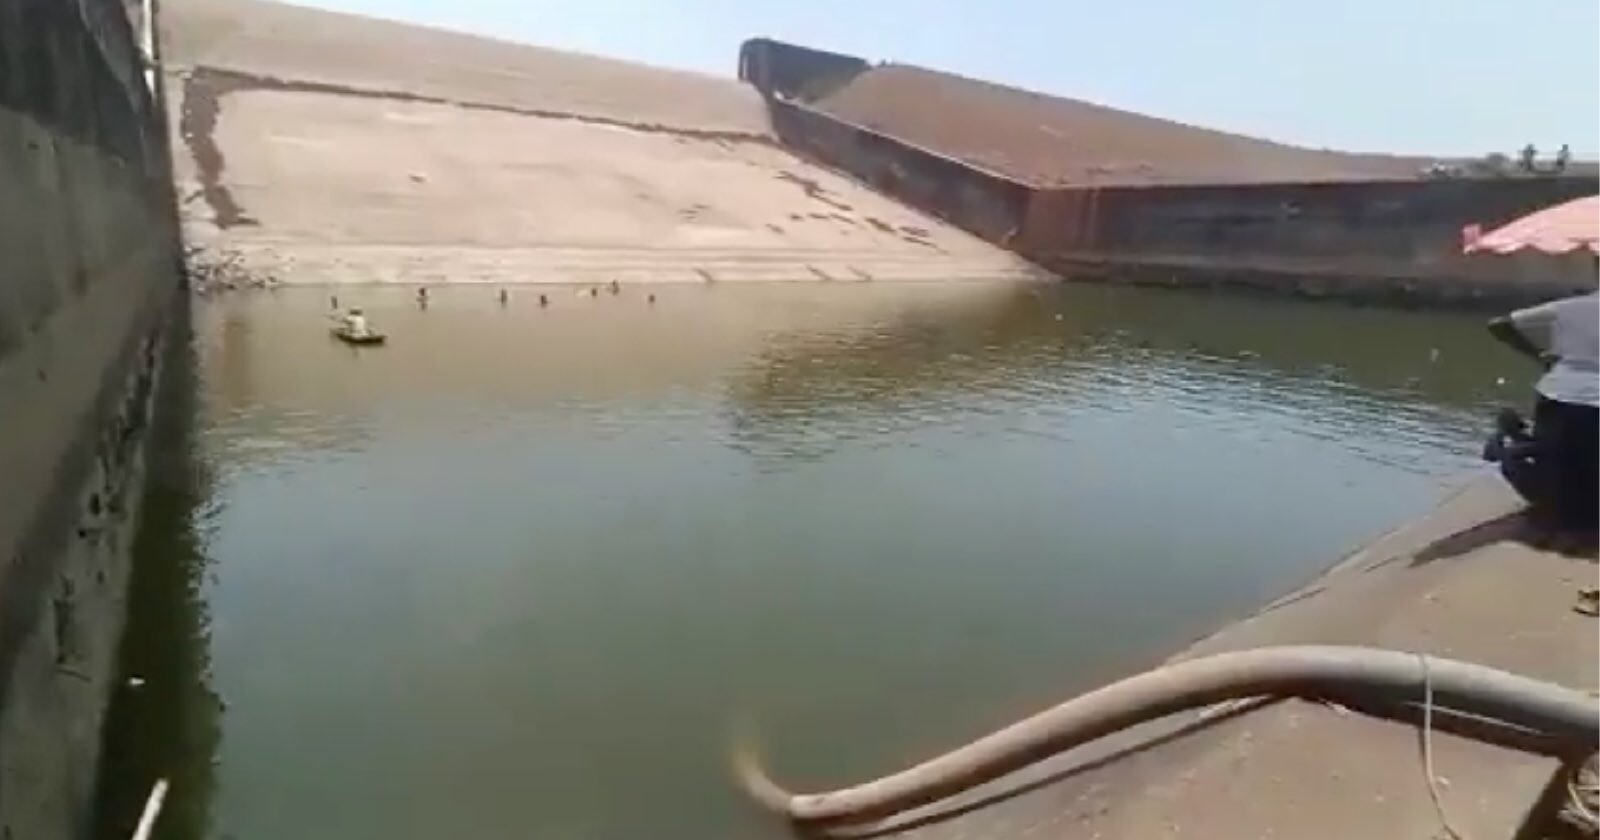 Official Drains Reservoir to Retrieve Phone He Dropped While Taking Selfie